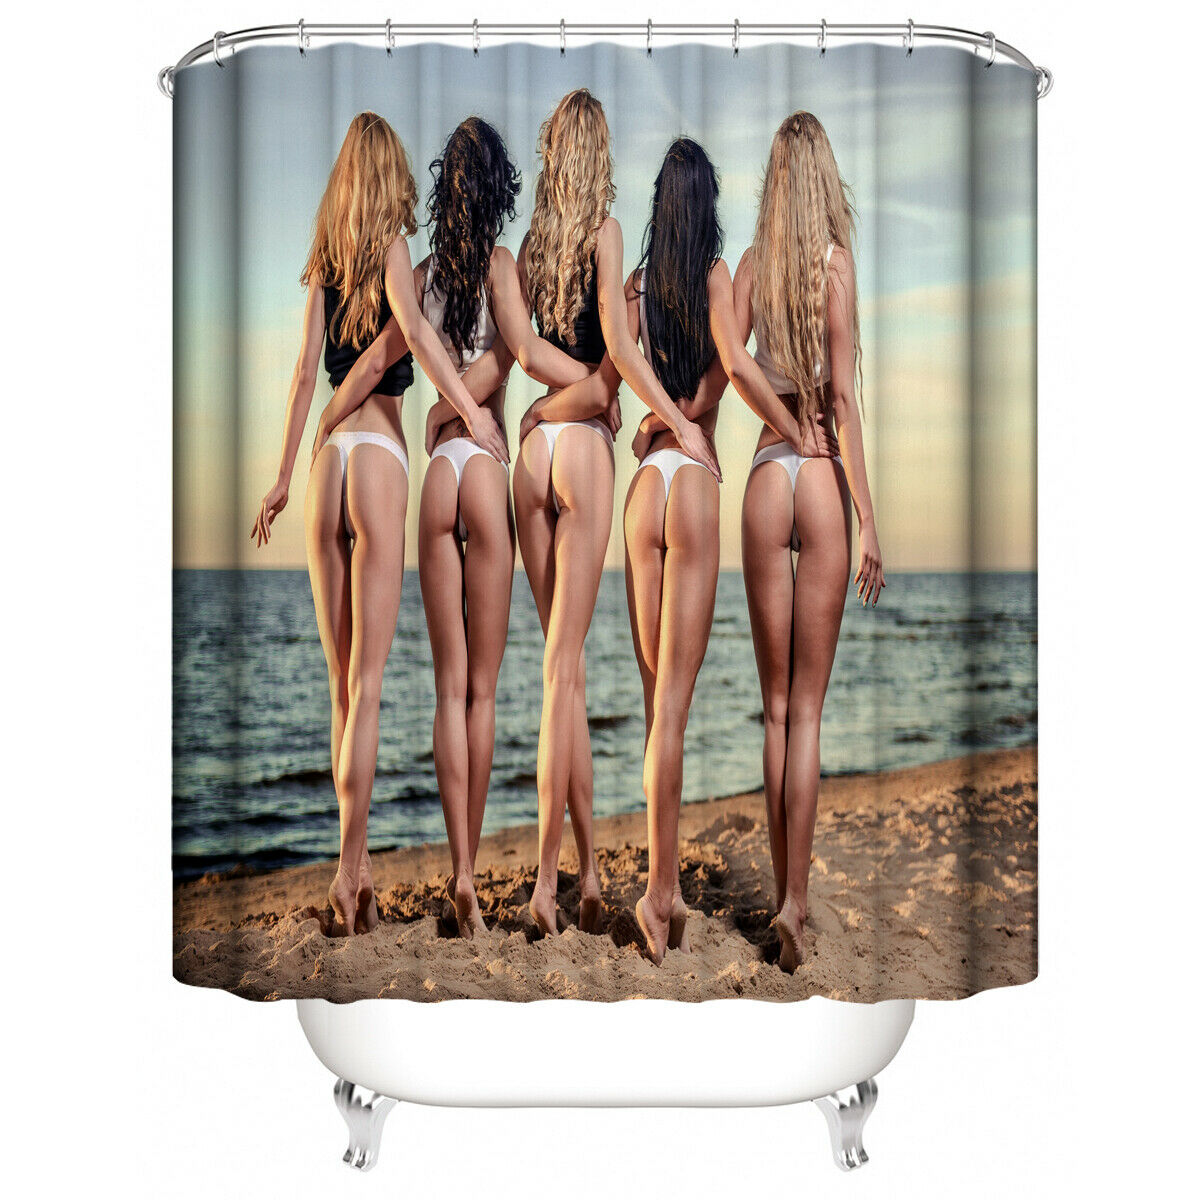 Sexy Women Shower Curtain Bathroom Rug Set Bath Mat Non-Slip Toilet Lid Cover-180×180cm Shower Curtain Only-Free Shipping at meselling99